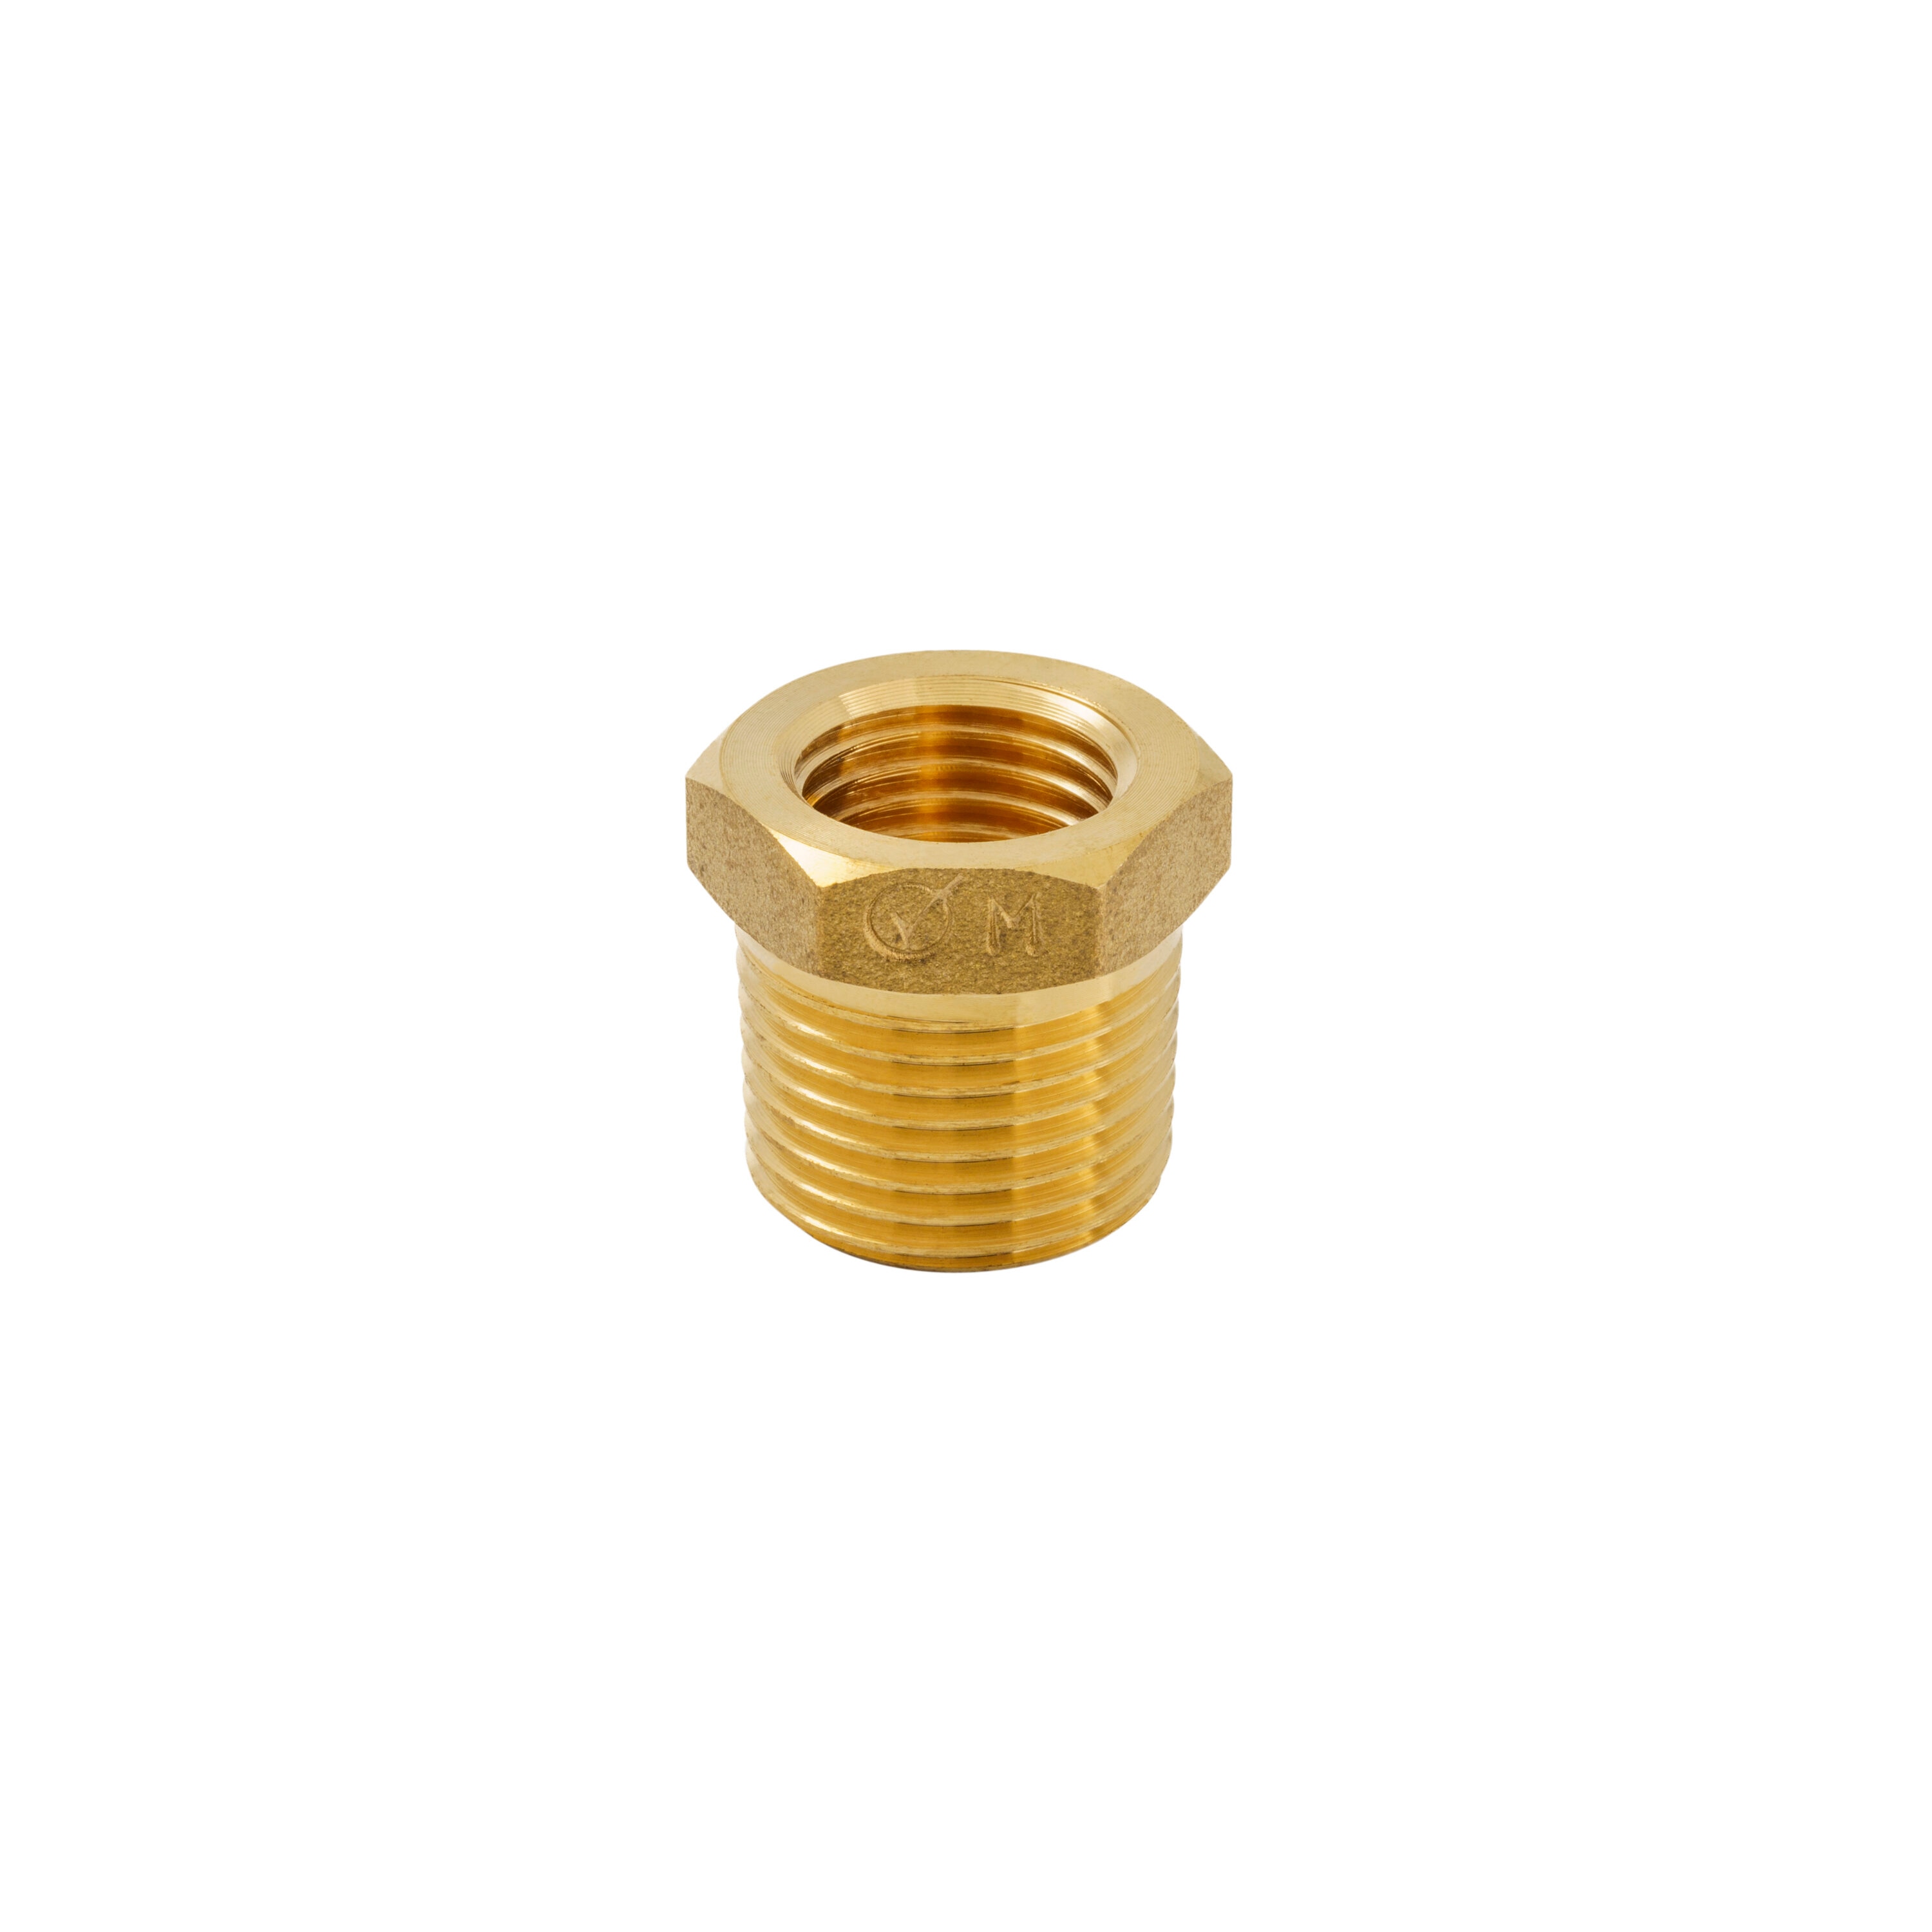 Proline Series 1/4-in x 3/8-in Compression Adapter Fitting in the